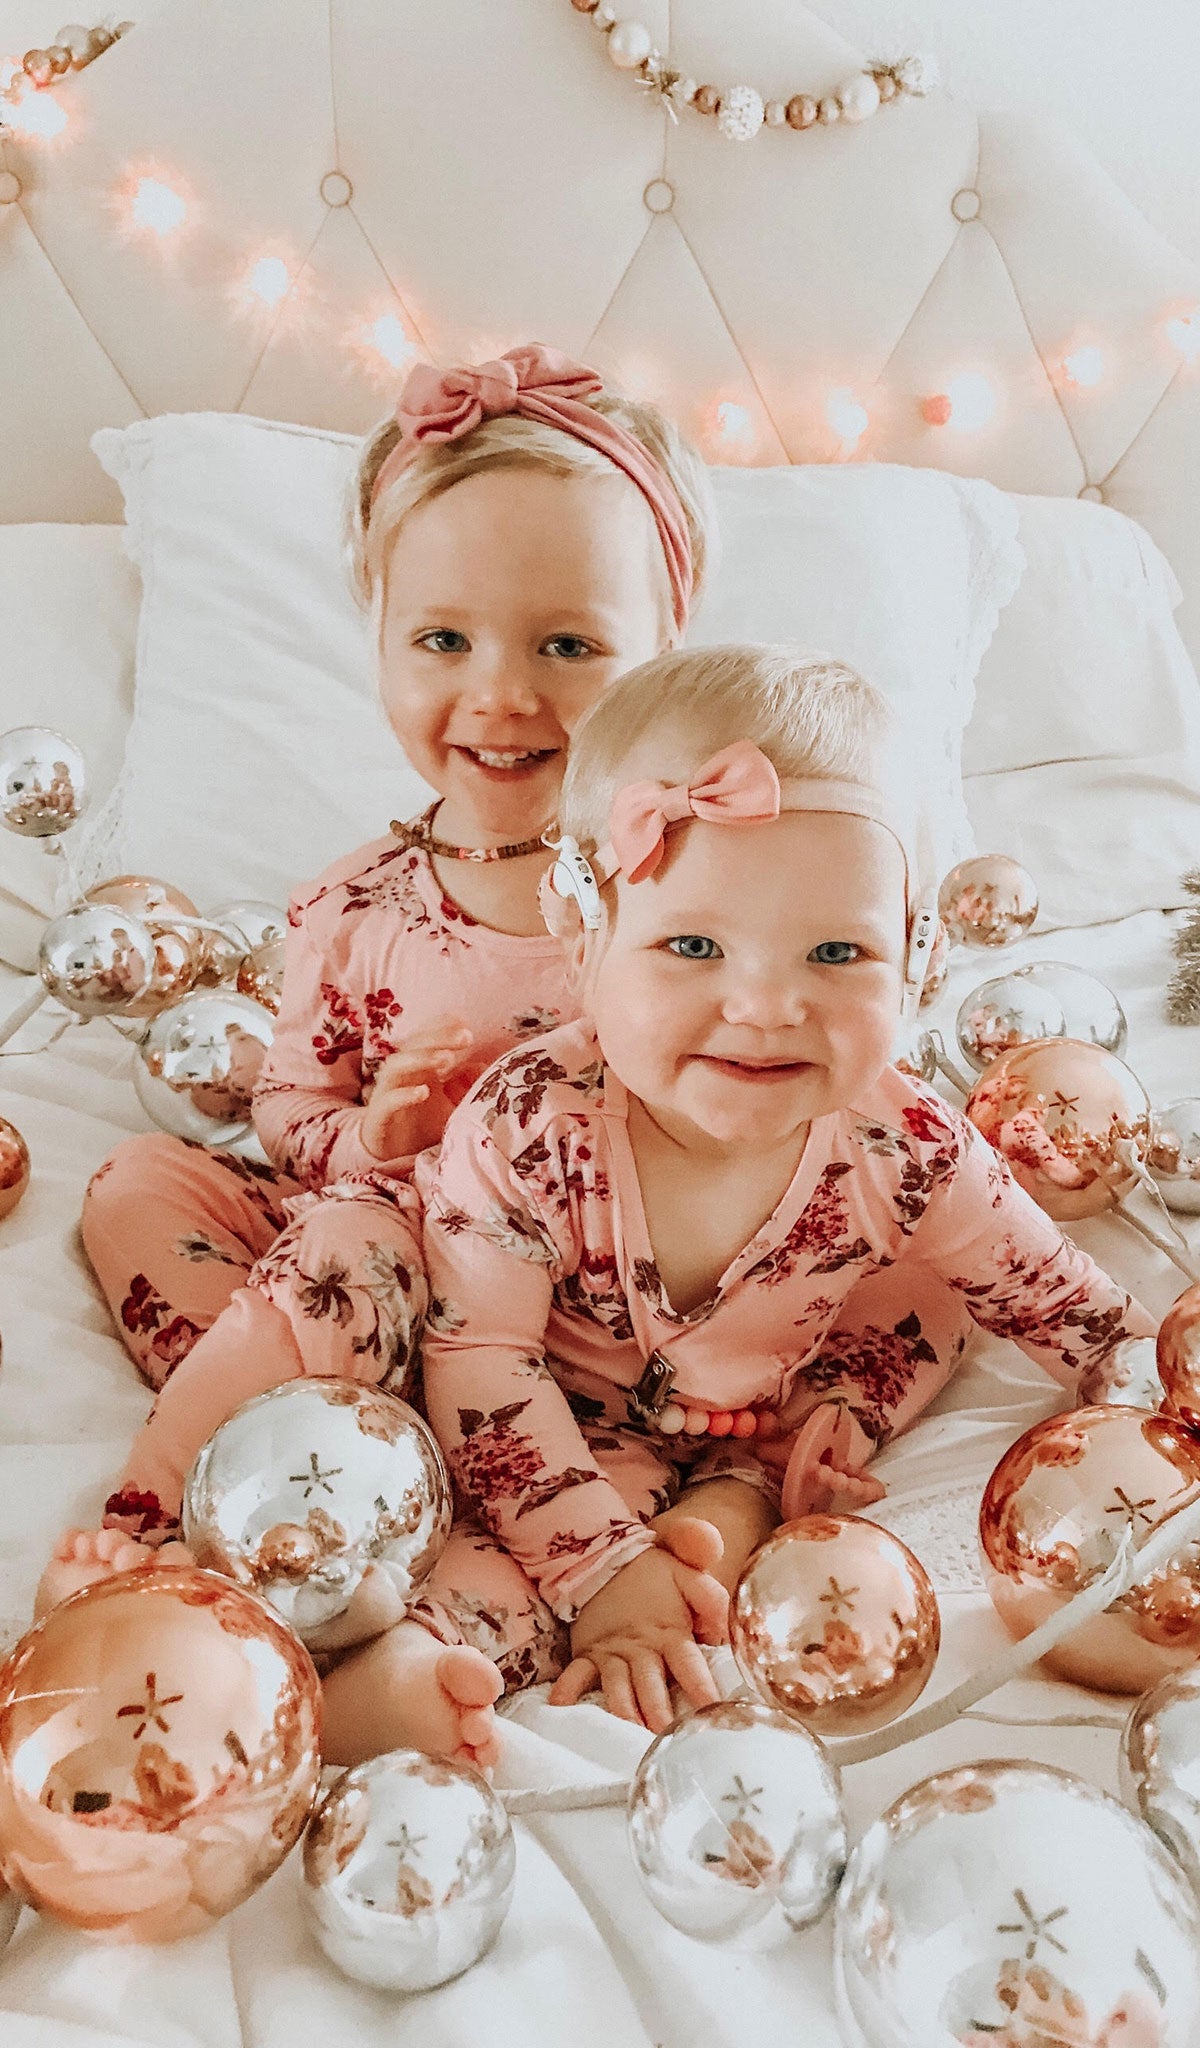 Blossom Charlie Baby 3-Piece Pant PJ. Little girl and baby sister sitting on bed with Christmas ball decoration garland wearing Charlie long sleeve top and pant from 3-Piece PJ set.